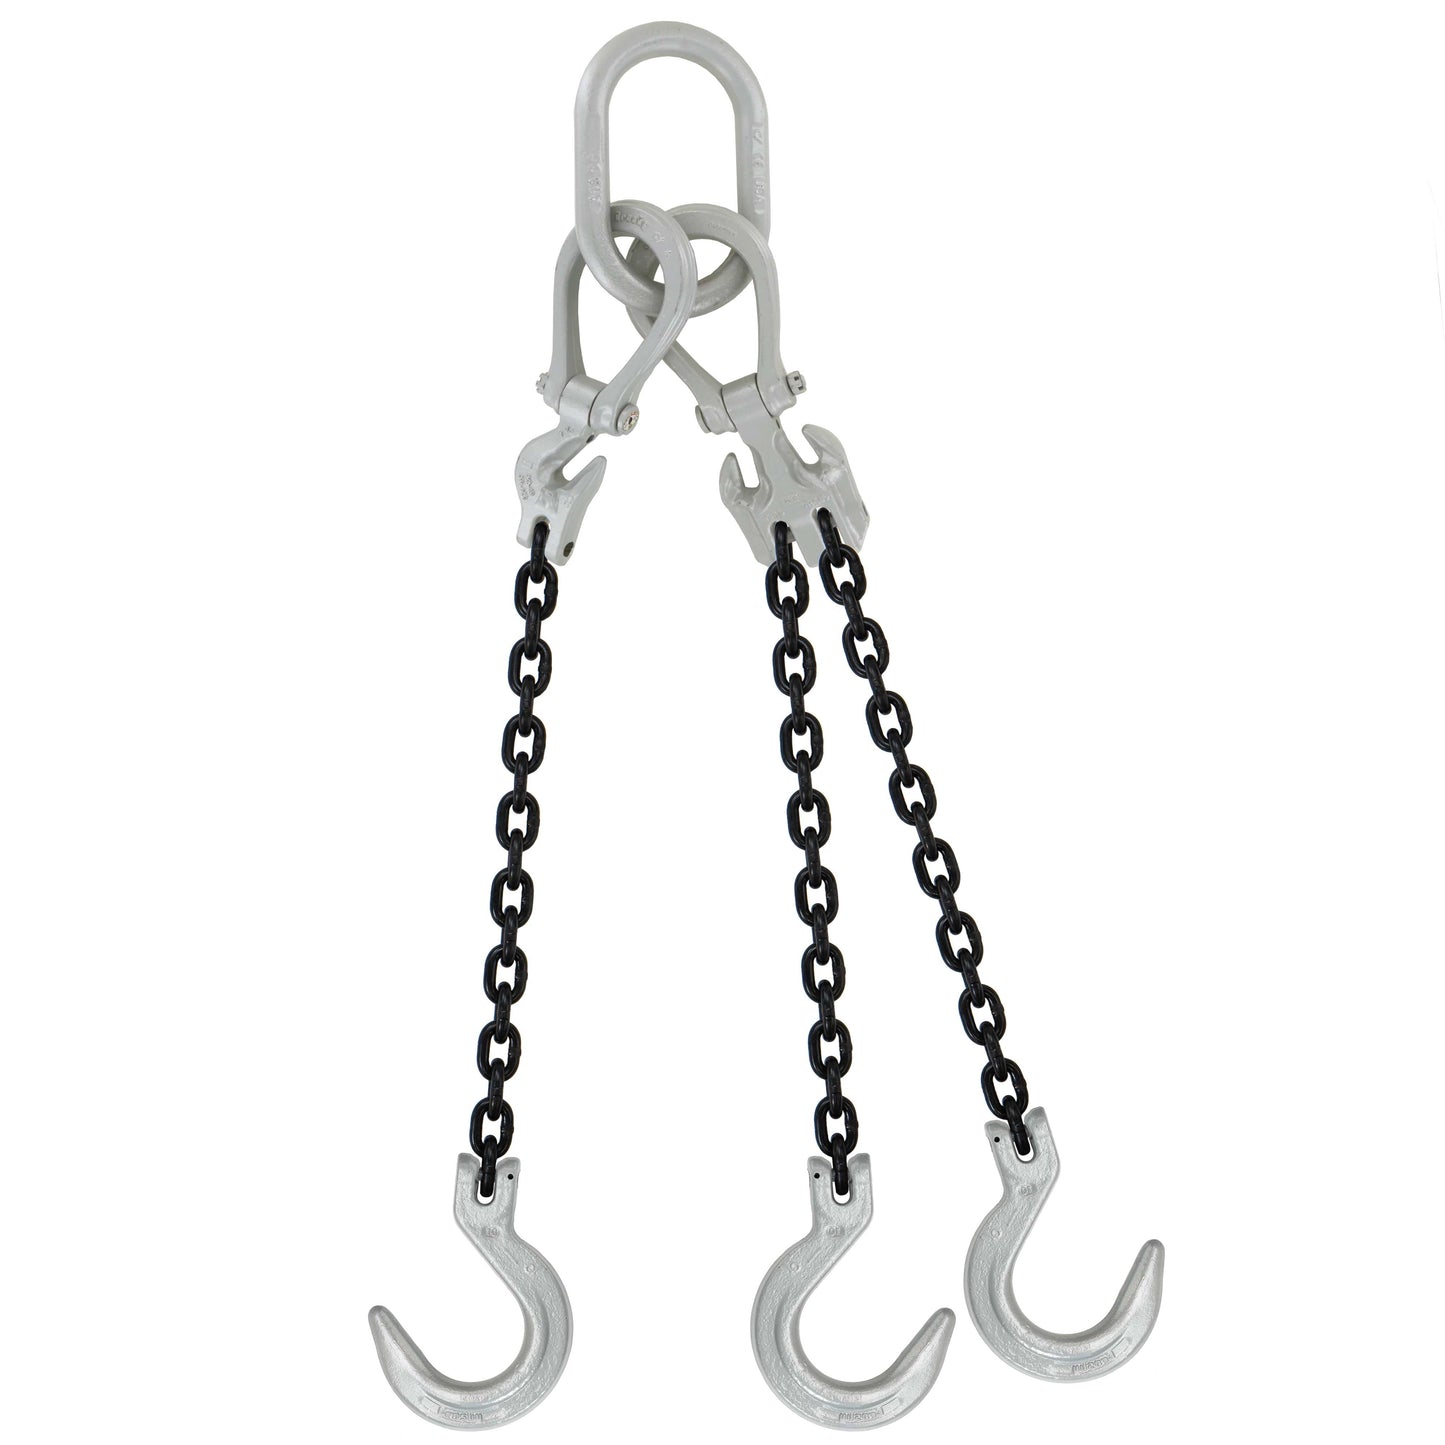 12 inch x 20 foot Domestic Adjustable 3 Leg Chain Sling w Crosby Foundry Hooks Grade 100 image 1 of 2